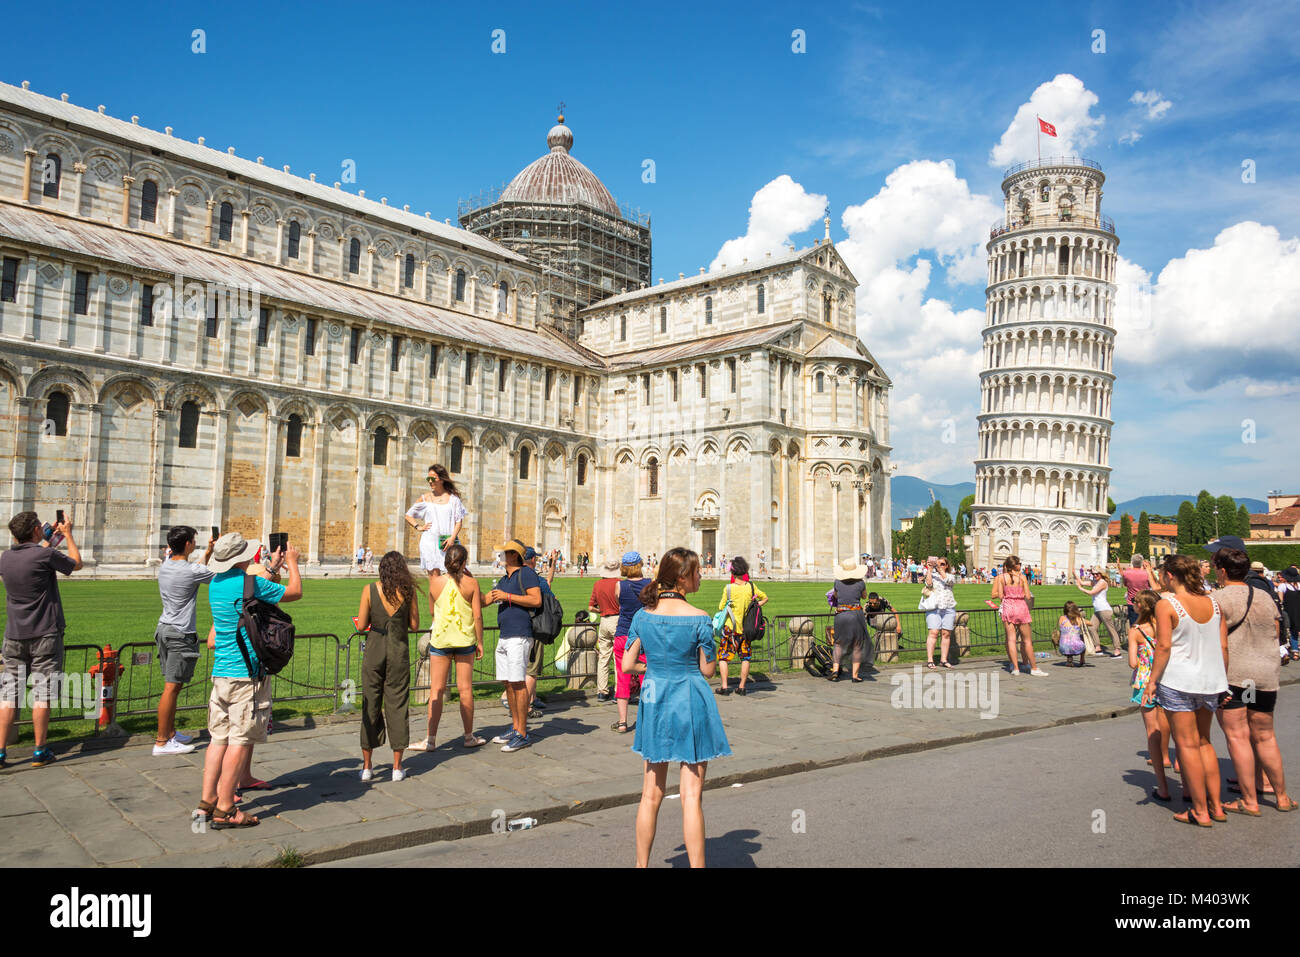 People having fun and taking pictures of the leaning tower of Pisa in Tuscany, Italy Stock Photo